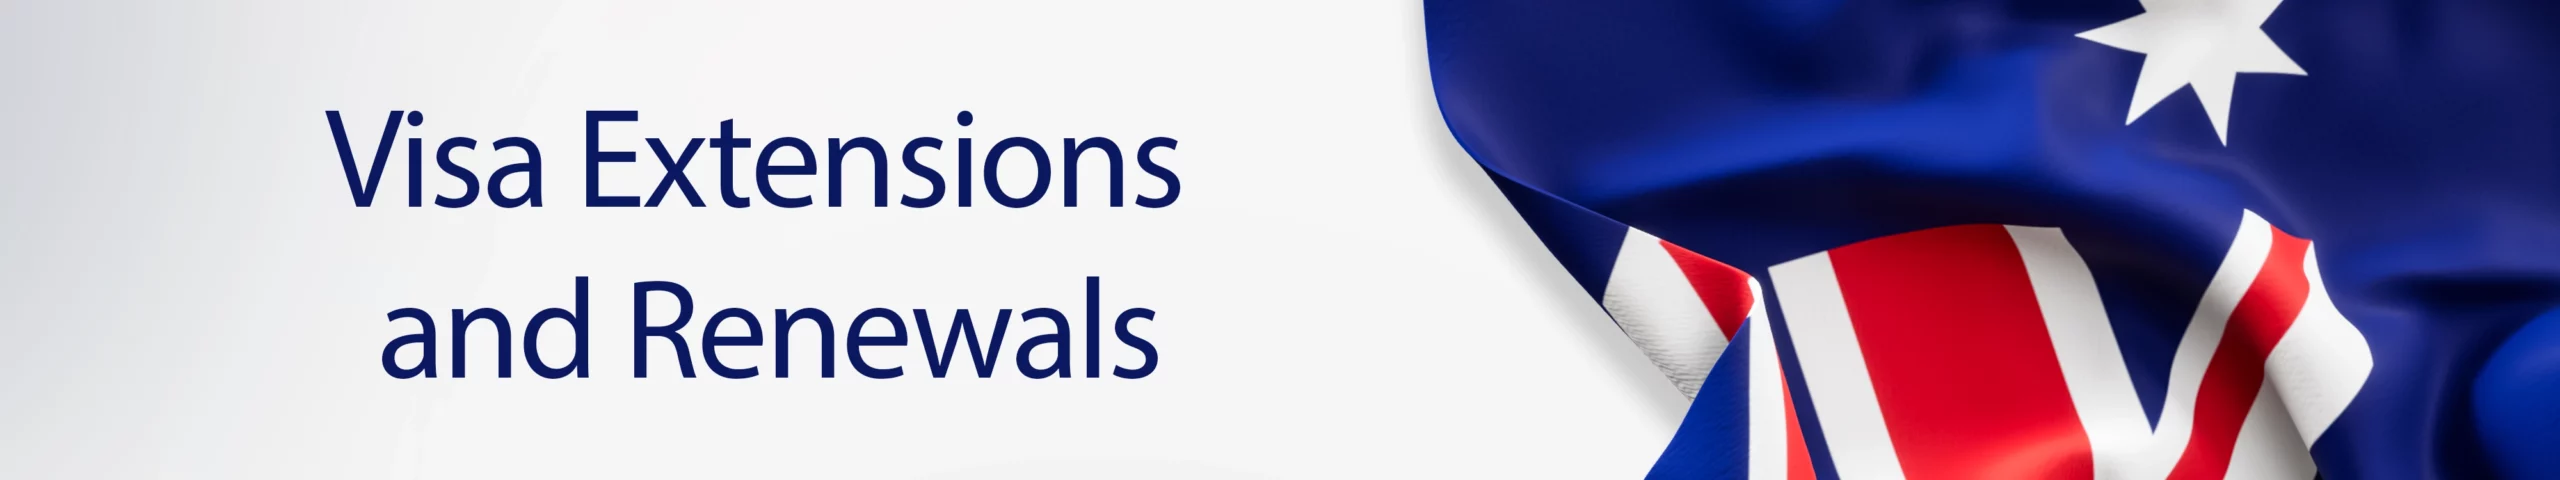 Visa Extensions and Renewals banner